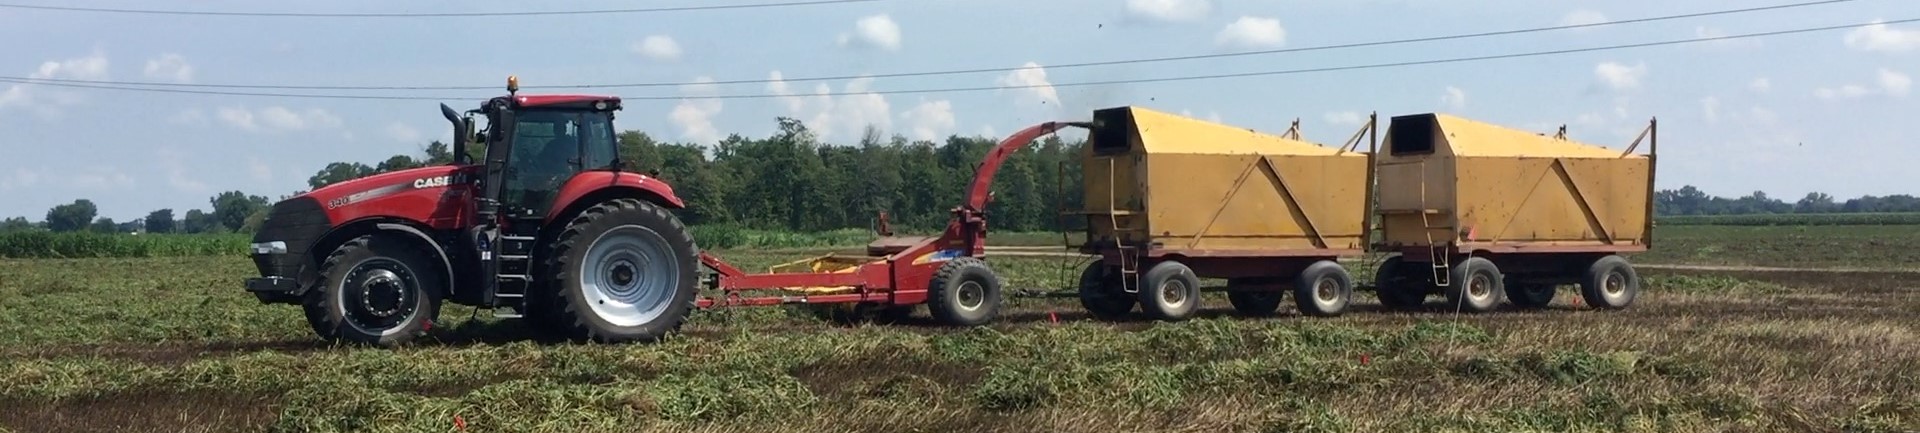 Tractor pulling two trailers harvesting mint.